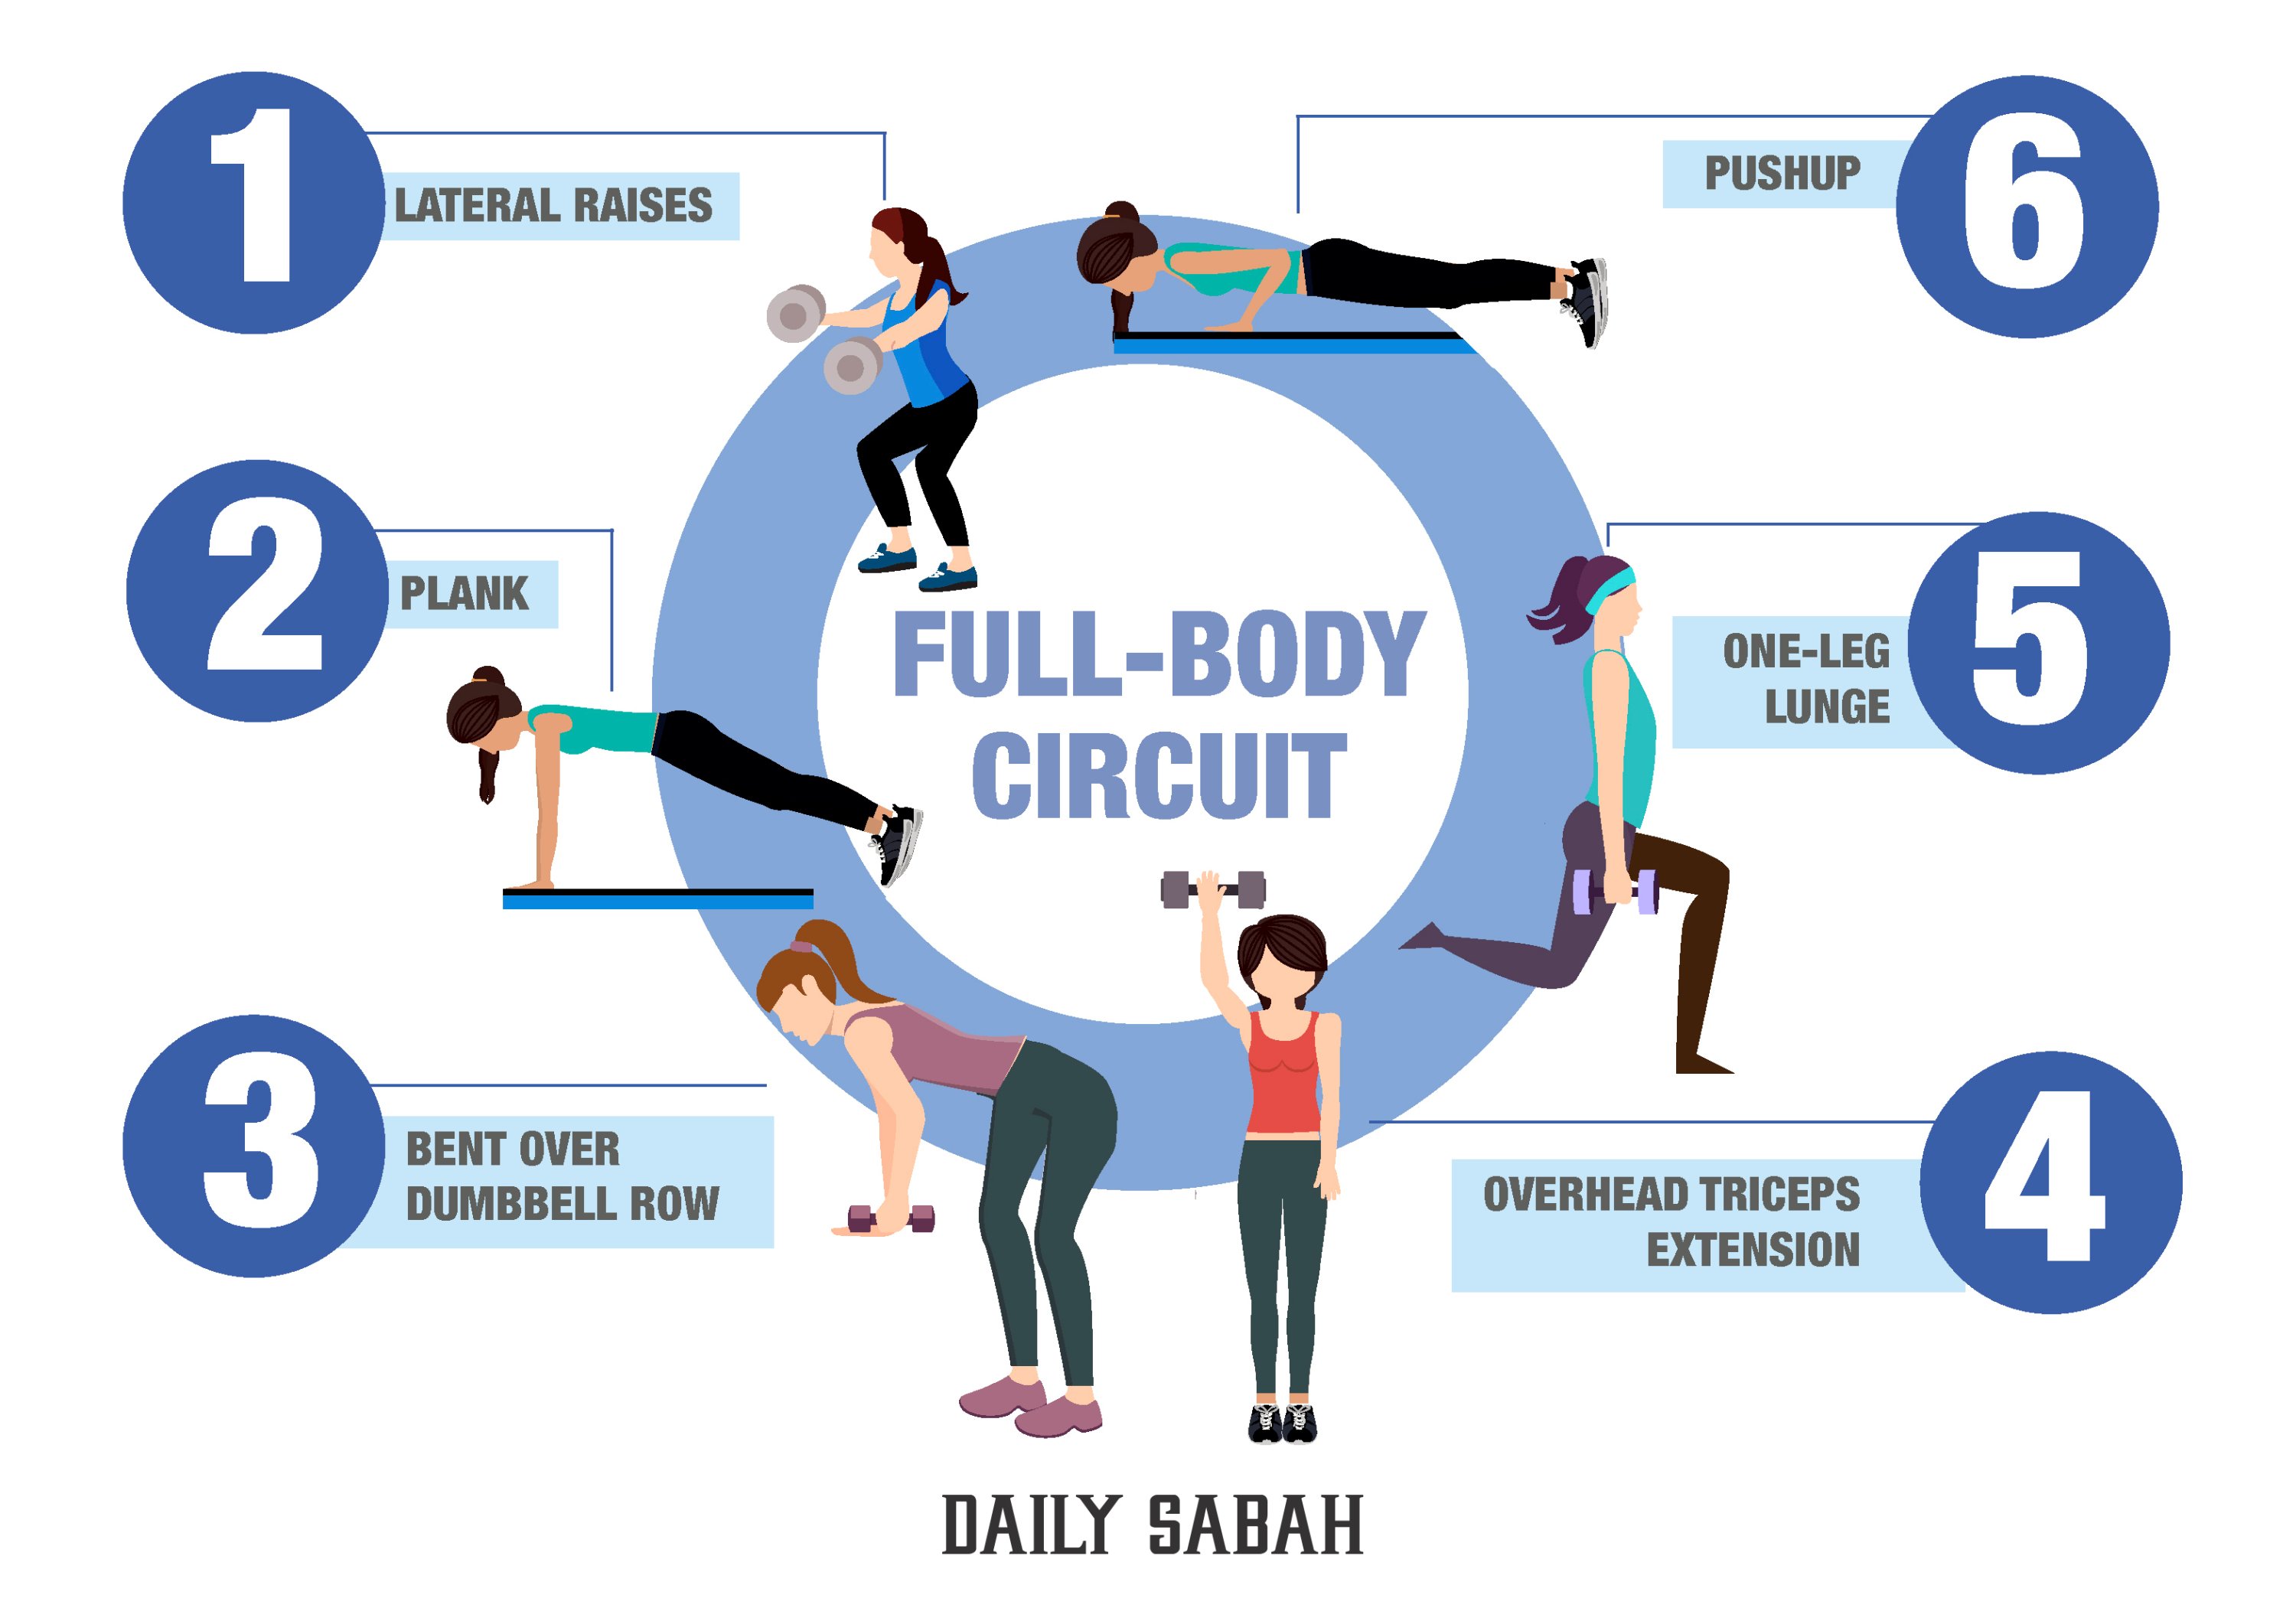 Self-isolation special: A full-body circuit workout you can do at